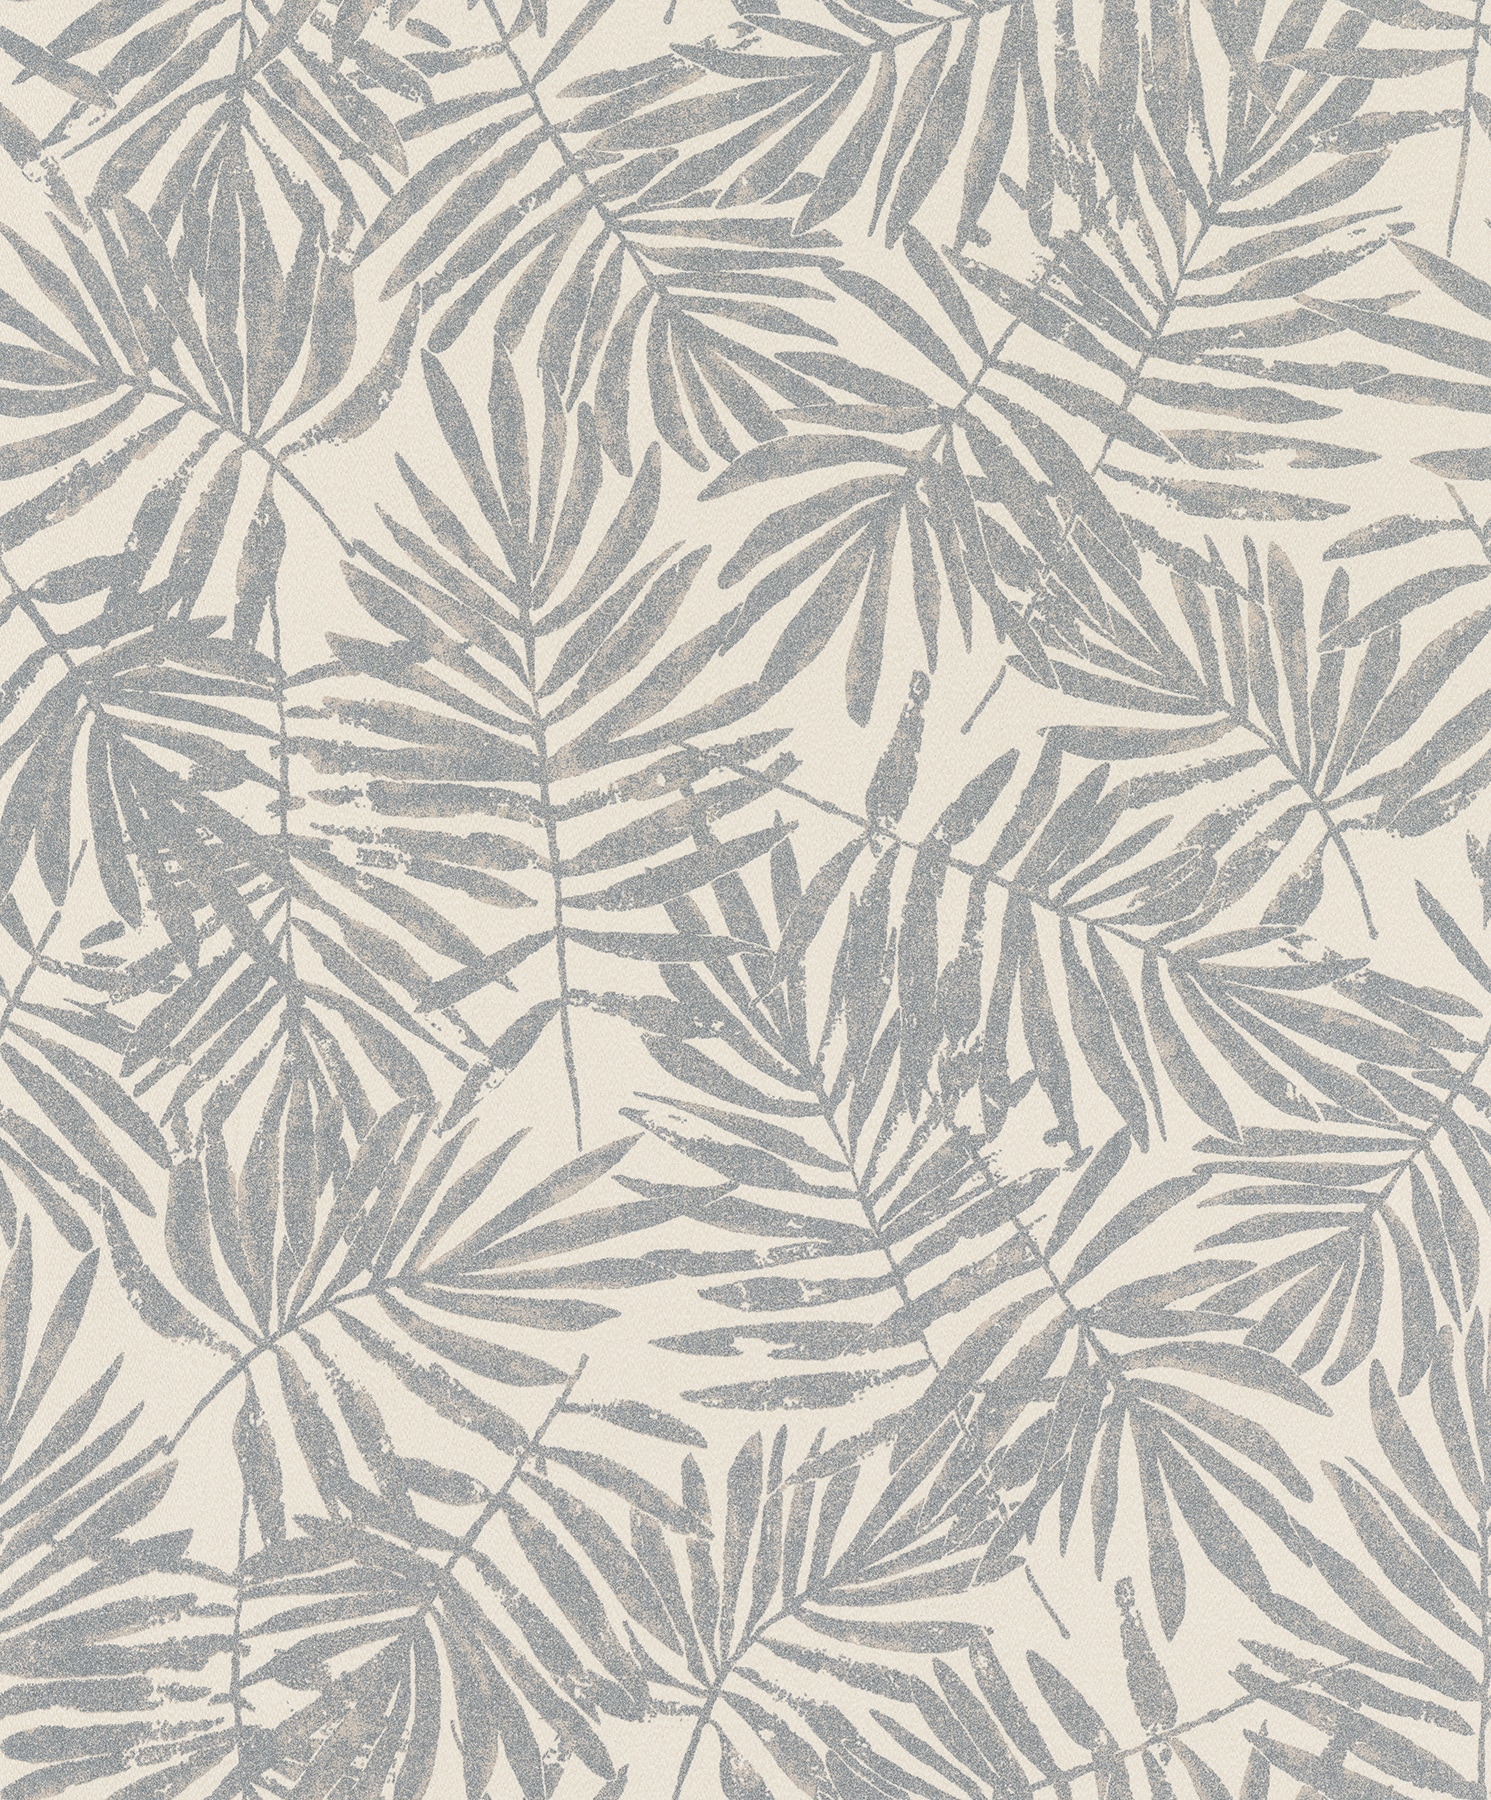 Marburg 56.4-sq ft Pewter Non-woven Ivy/Vines Unpasted Wallpaper in the ...